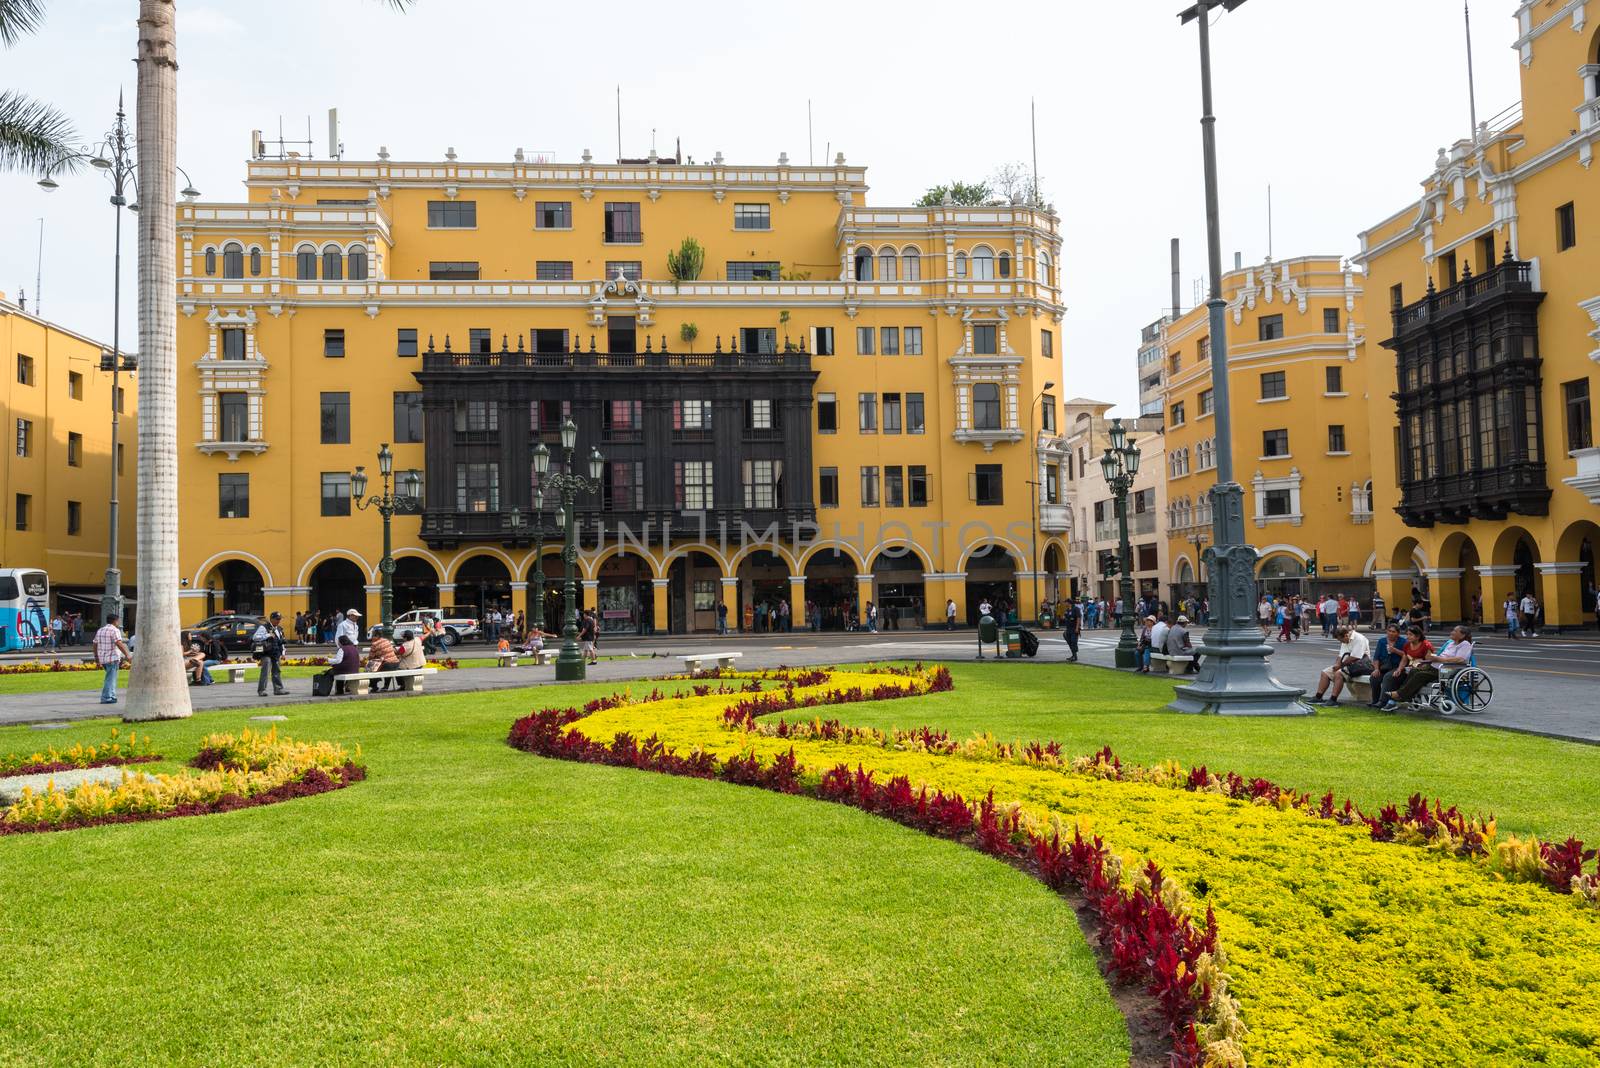 Tourists, residents and shoppers in the center of Lima Peru, the Plaza Mayor, with its flowers and yellow buildings.